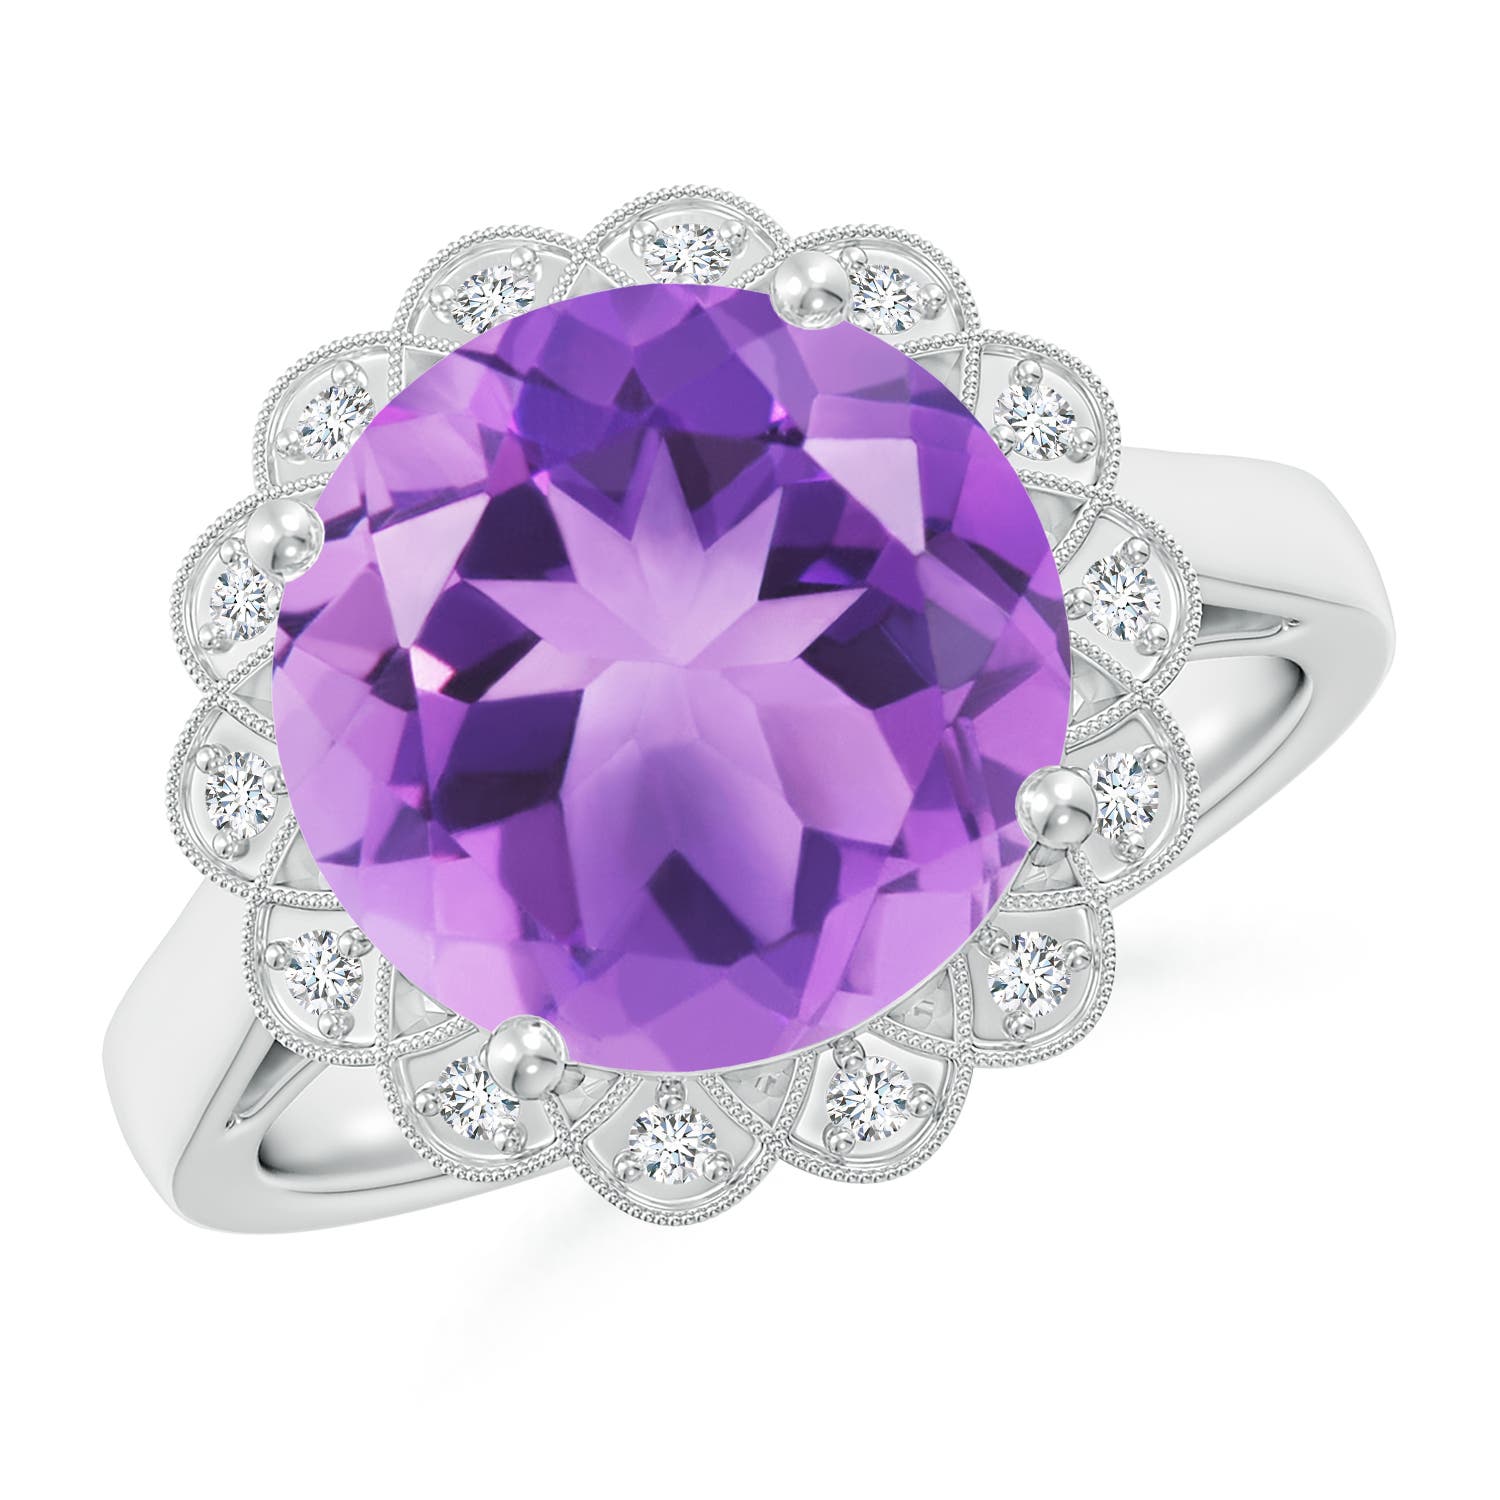 A - Amethyst / 4.86 CT / 14 KT White Gold